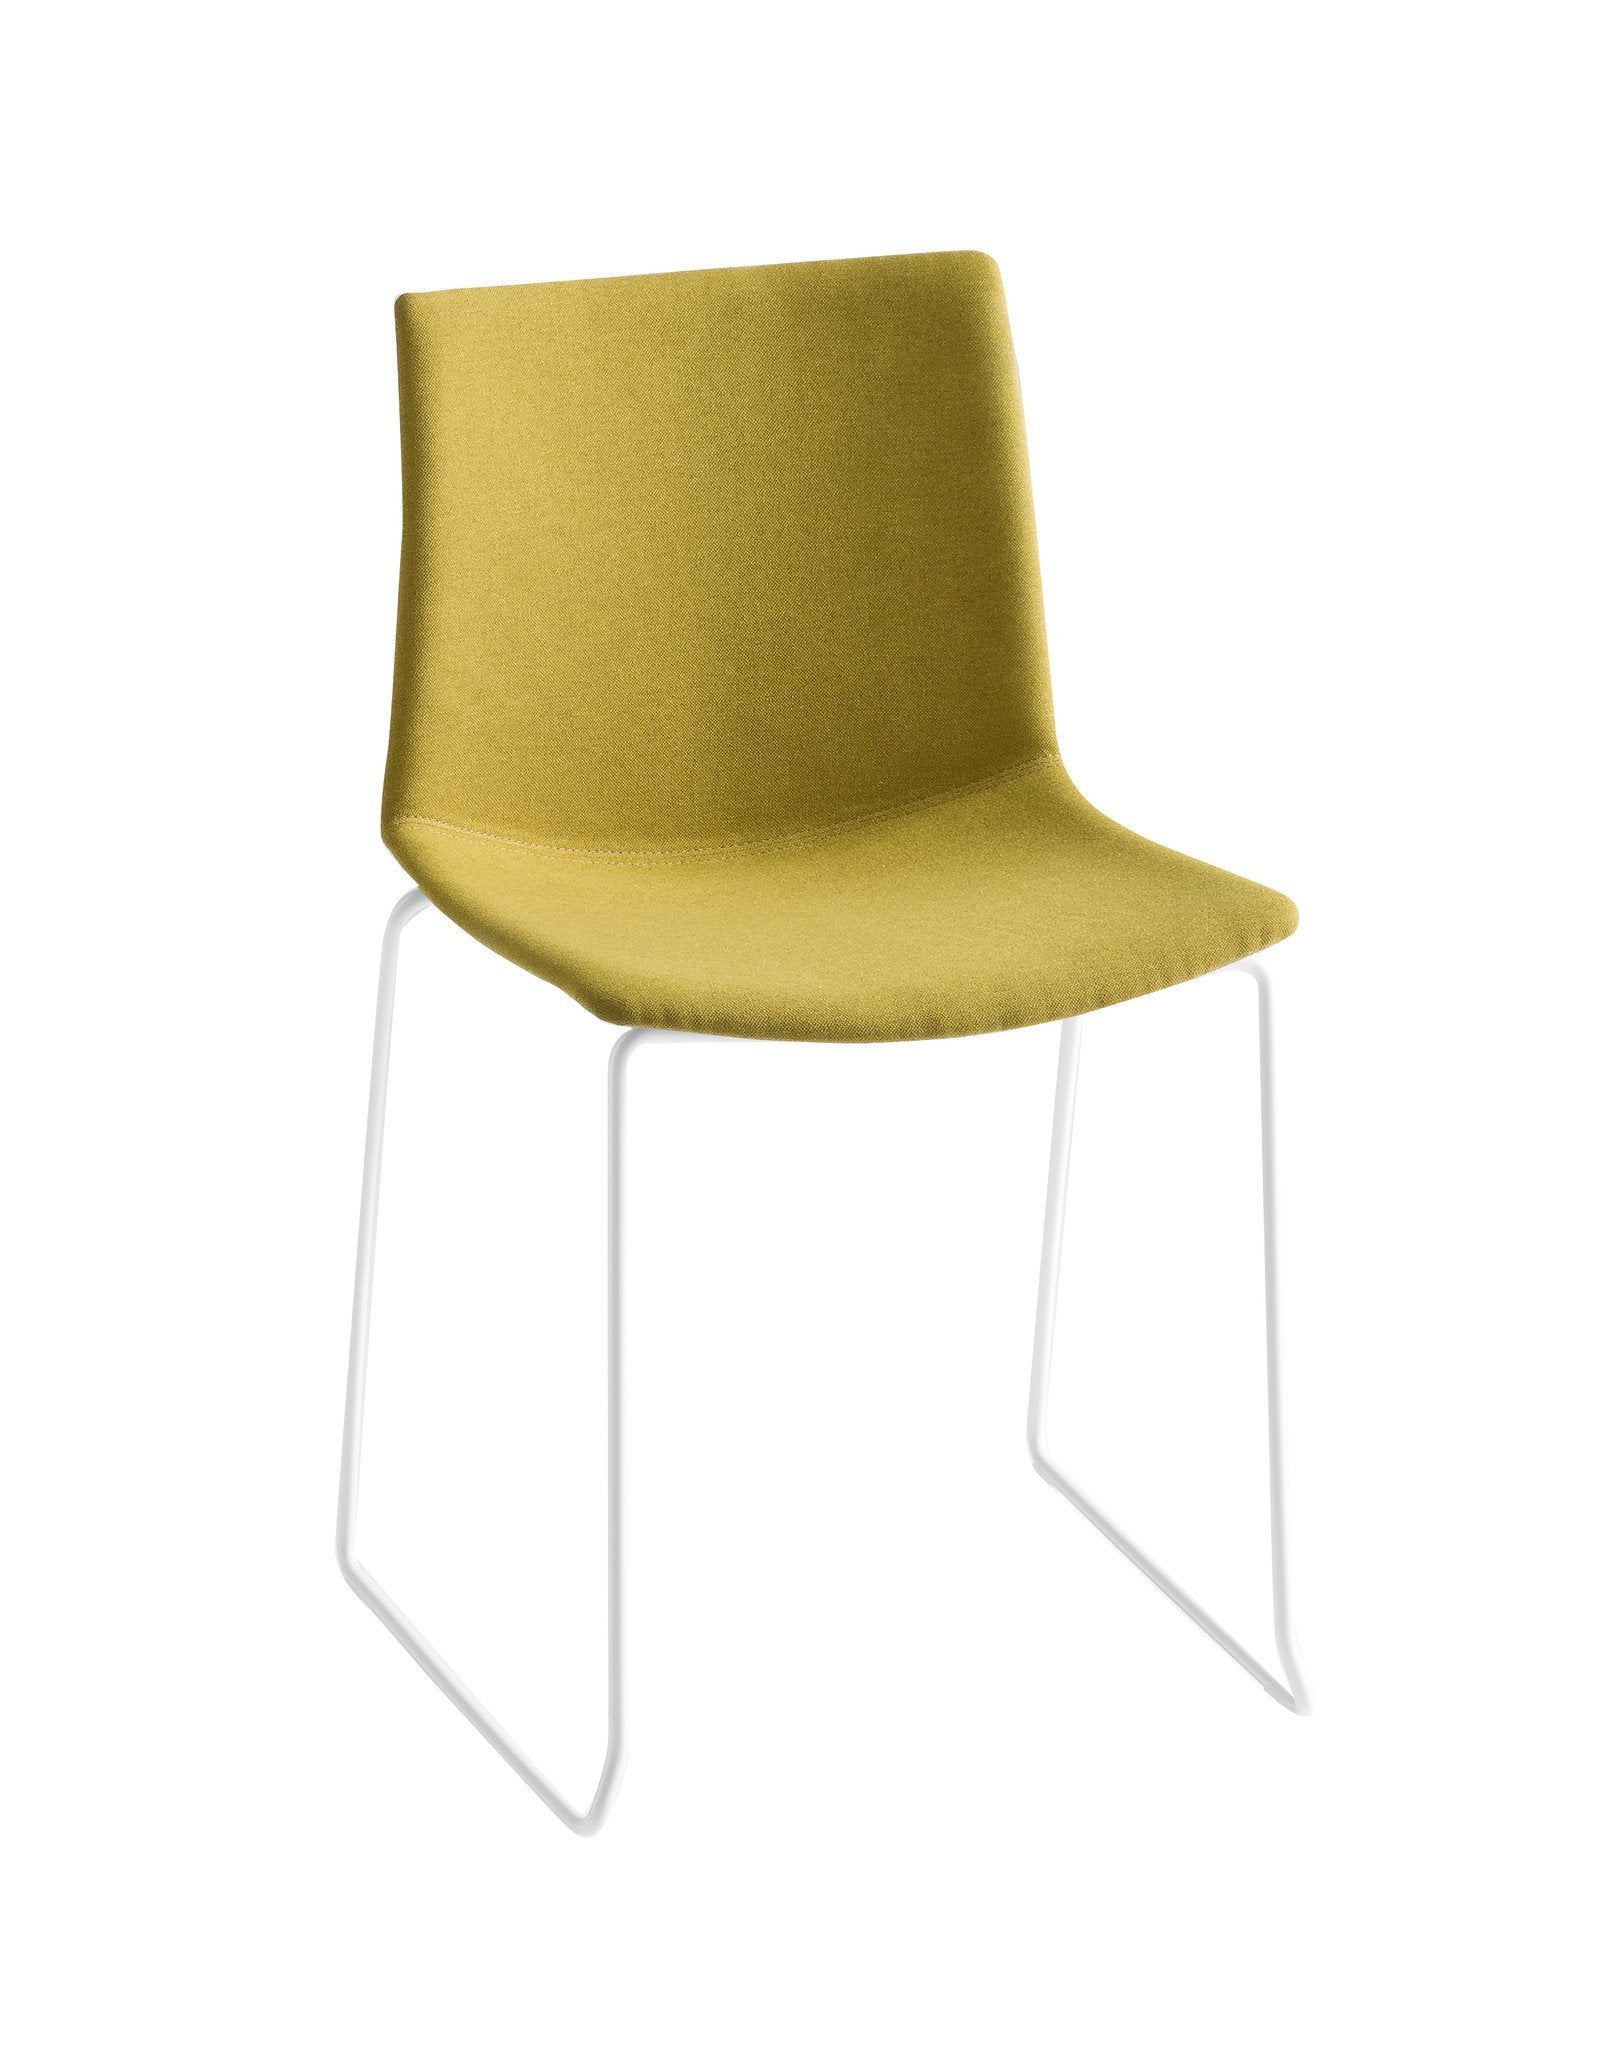 Kanvas Front Side Chair c/w Sled Legs-Gaber-Contract Furniture Store